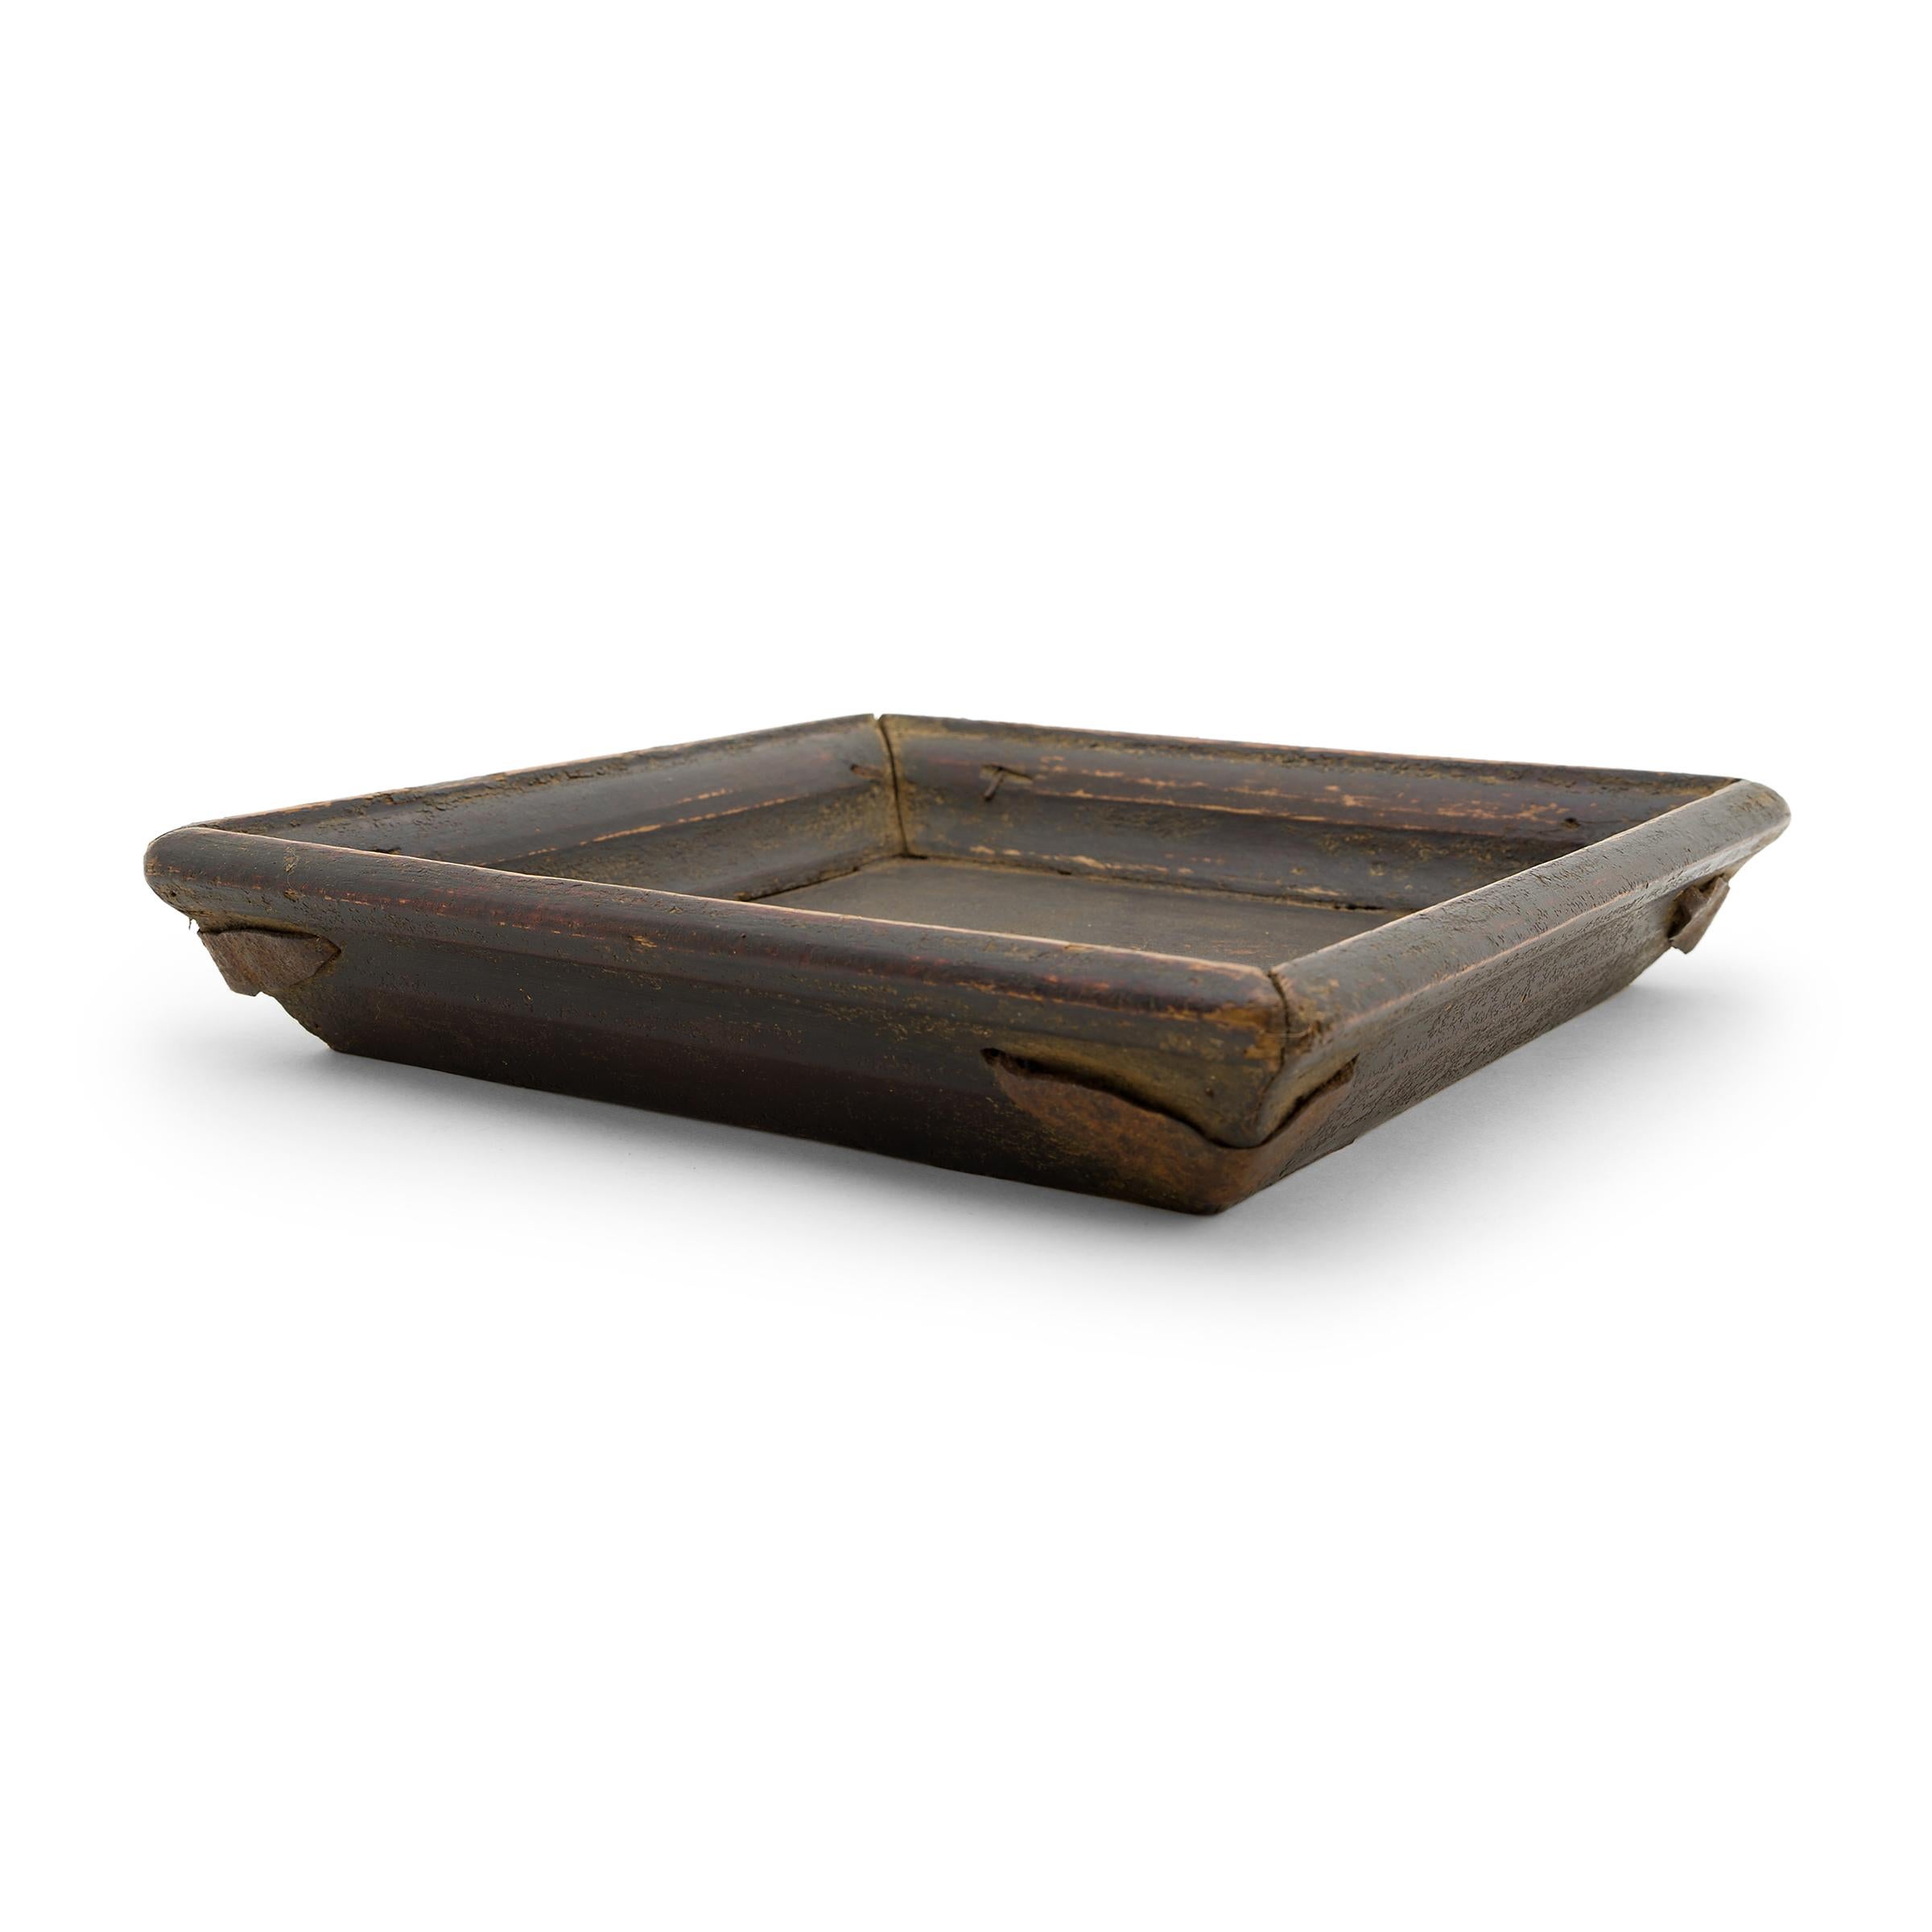 Simple lines, a modest form, and a layer of hand-brushed lacquer give this petite Qing-dynasty tray a provincial charm that recalls the warmth of home. The dark, red-brown lacquer finish has weathered with time to reveal the pine wood underneath and